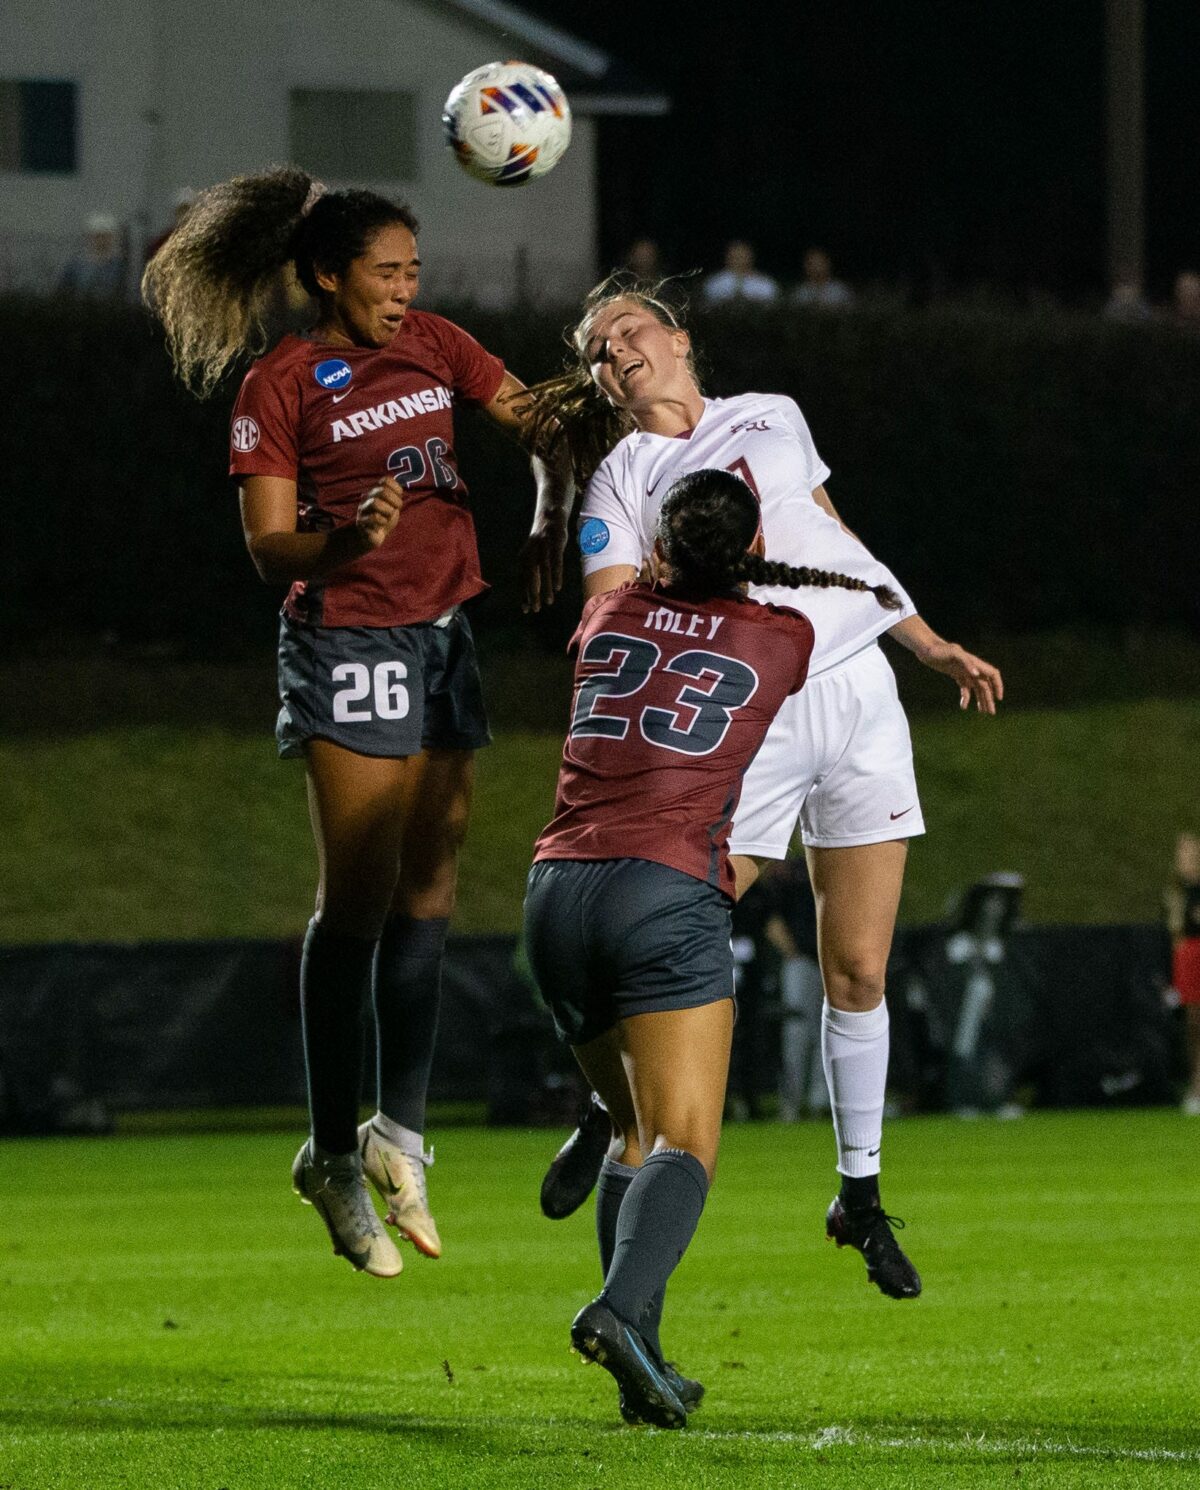 Razorback women’s soccer adds all-conference forward